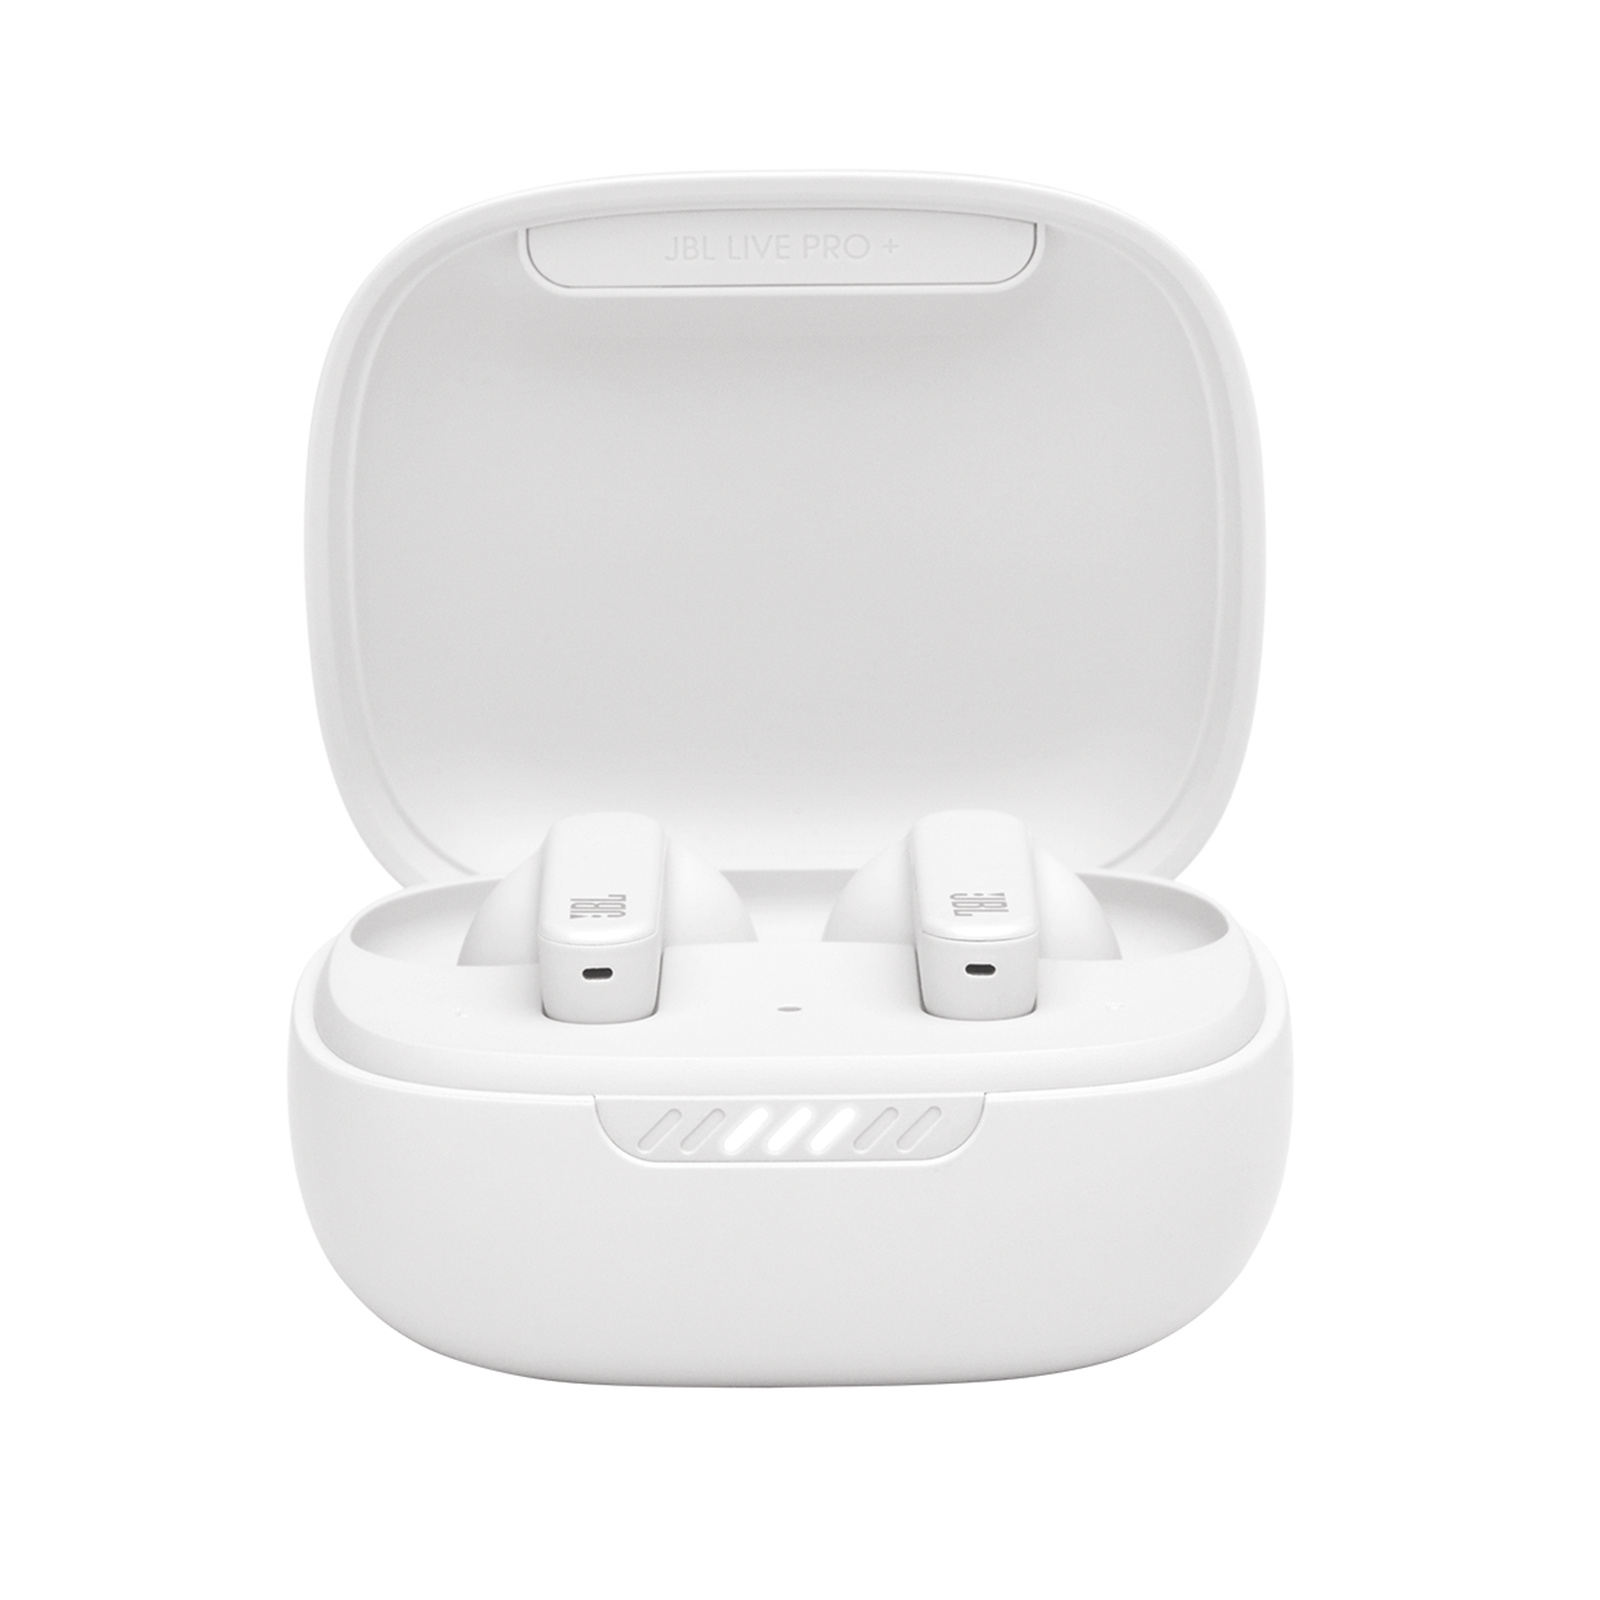 True Wireless In-ear Noise Cancelling Bluetooth Headphones with 28-hour battery JBL LIVE PRO+ TWS wireless charging Fast Pair in white